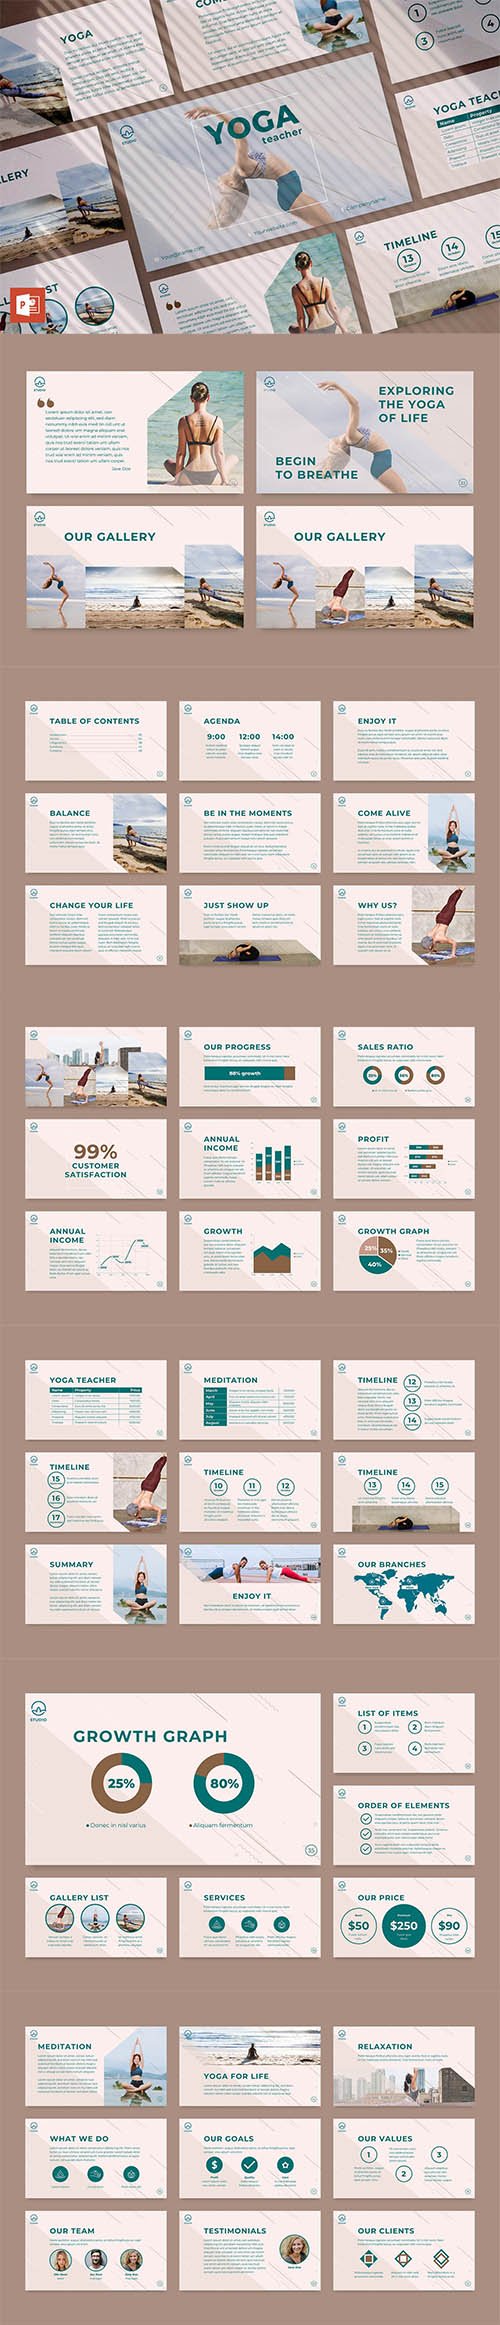 Yoga Instructor PowerPoint Presentation Template